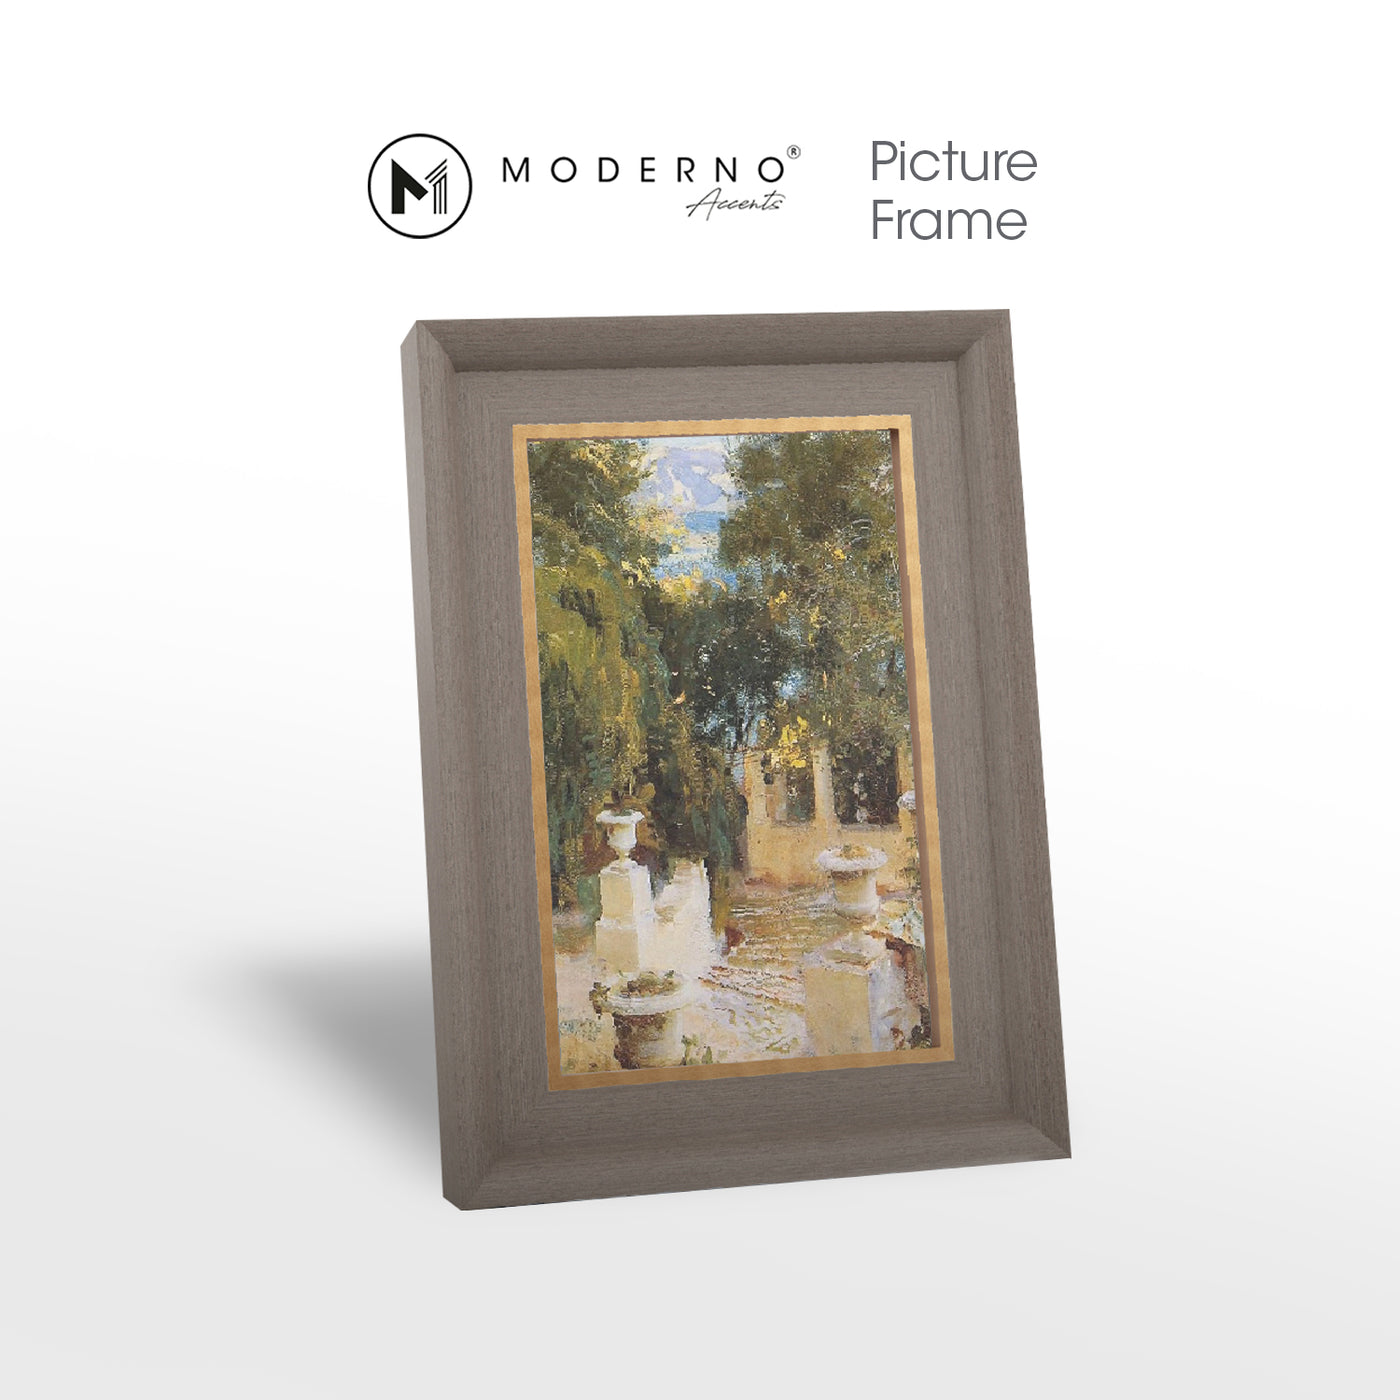 MODERNO Single Picture Frame - 2 Tone with Gold Side Photo Frame